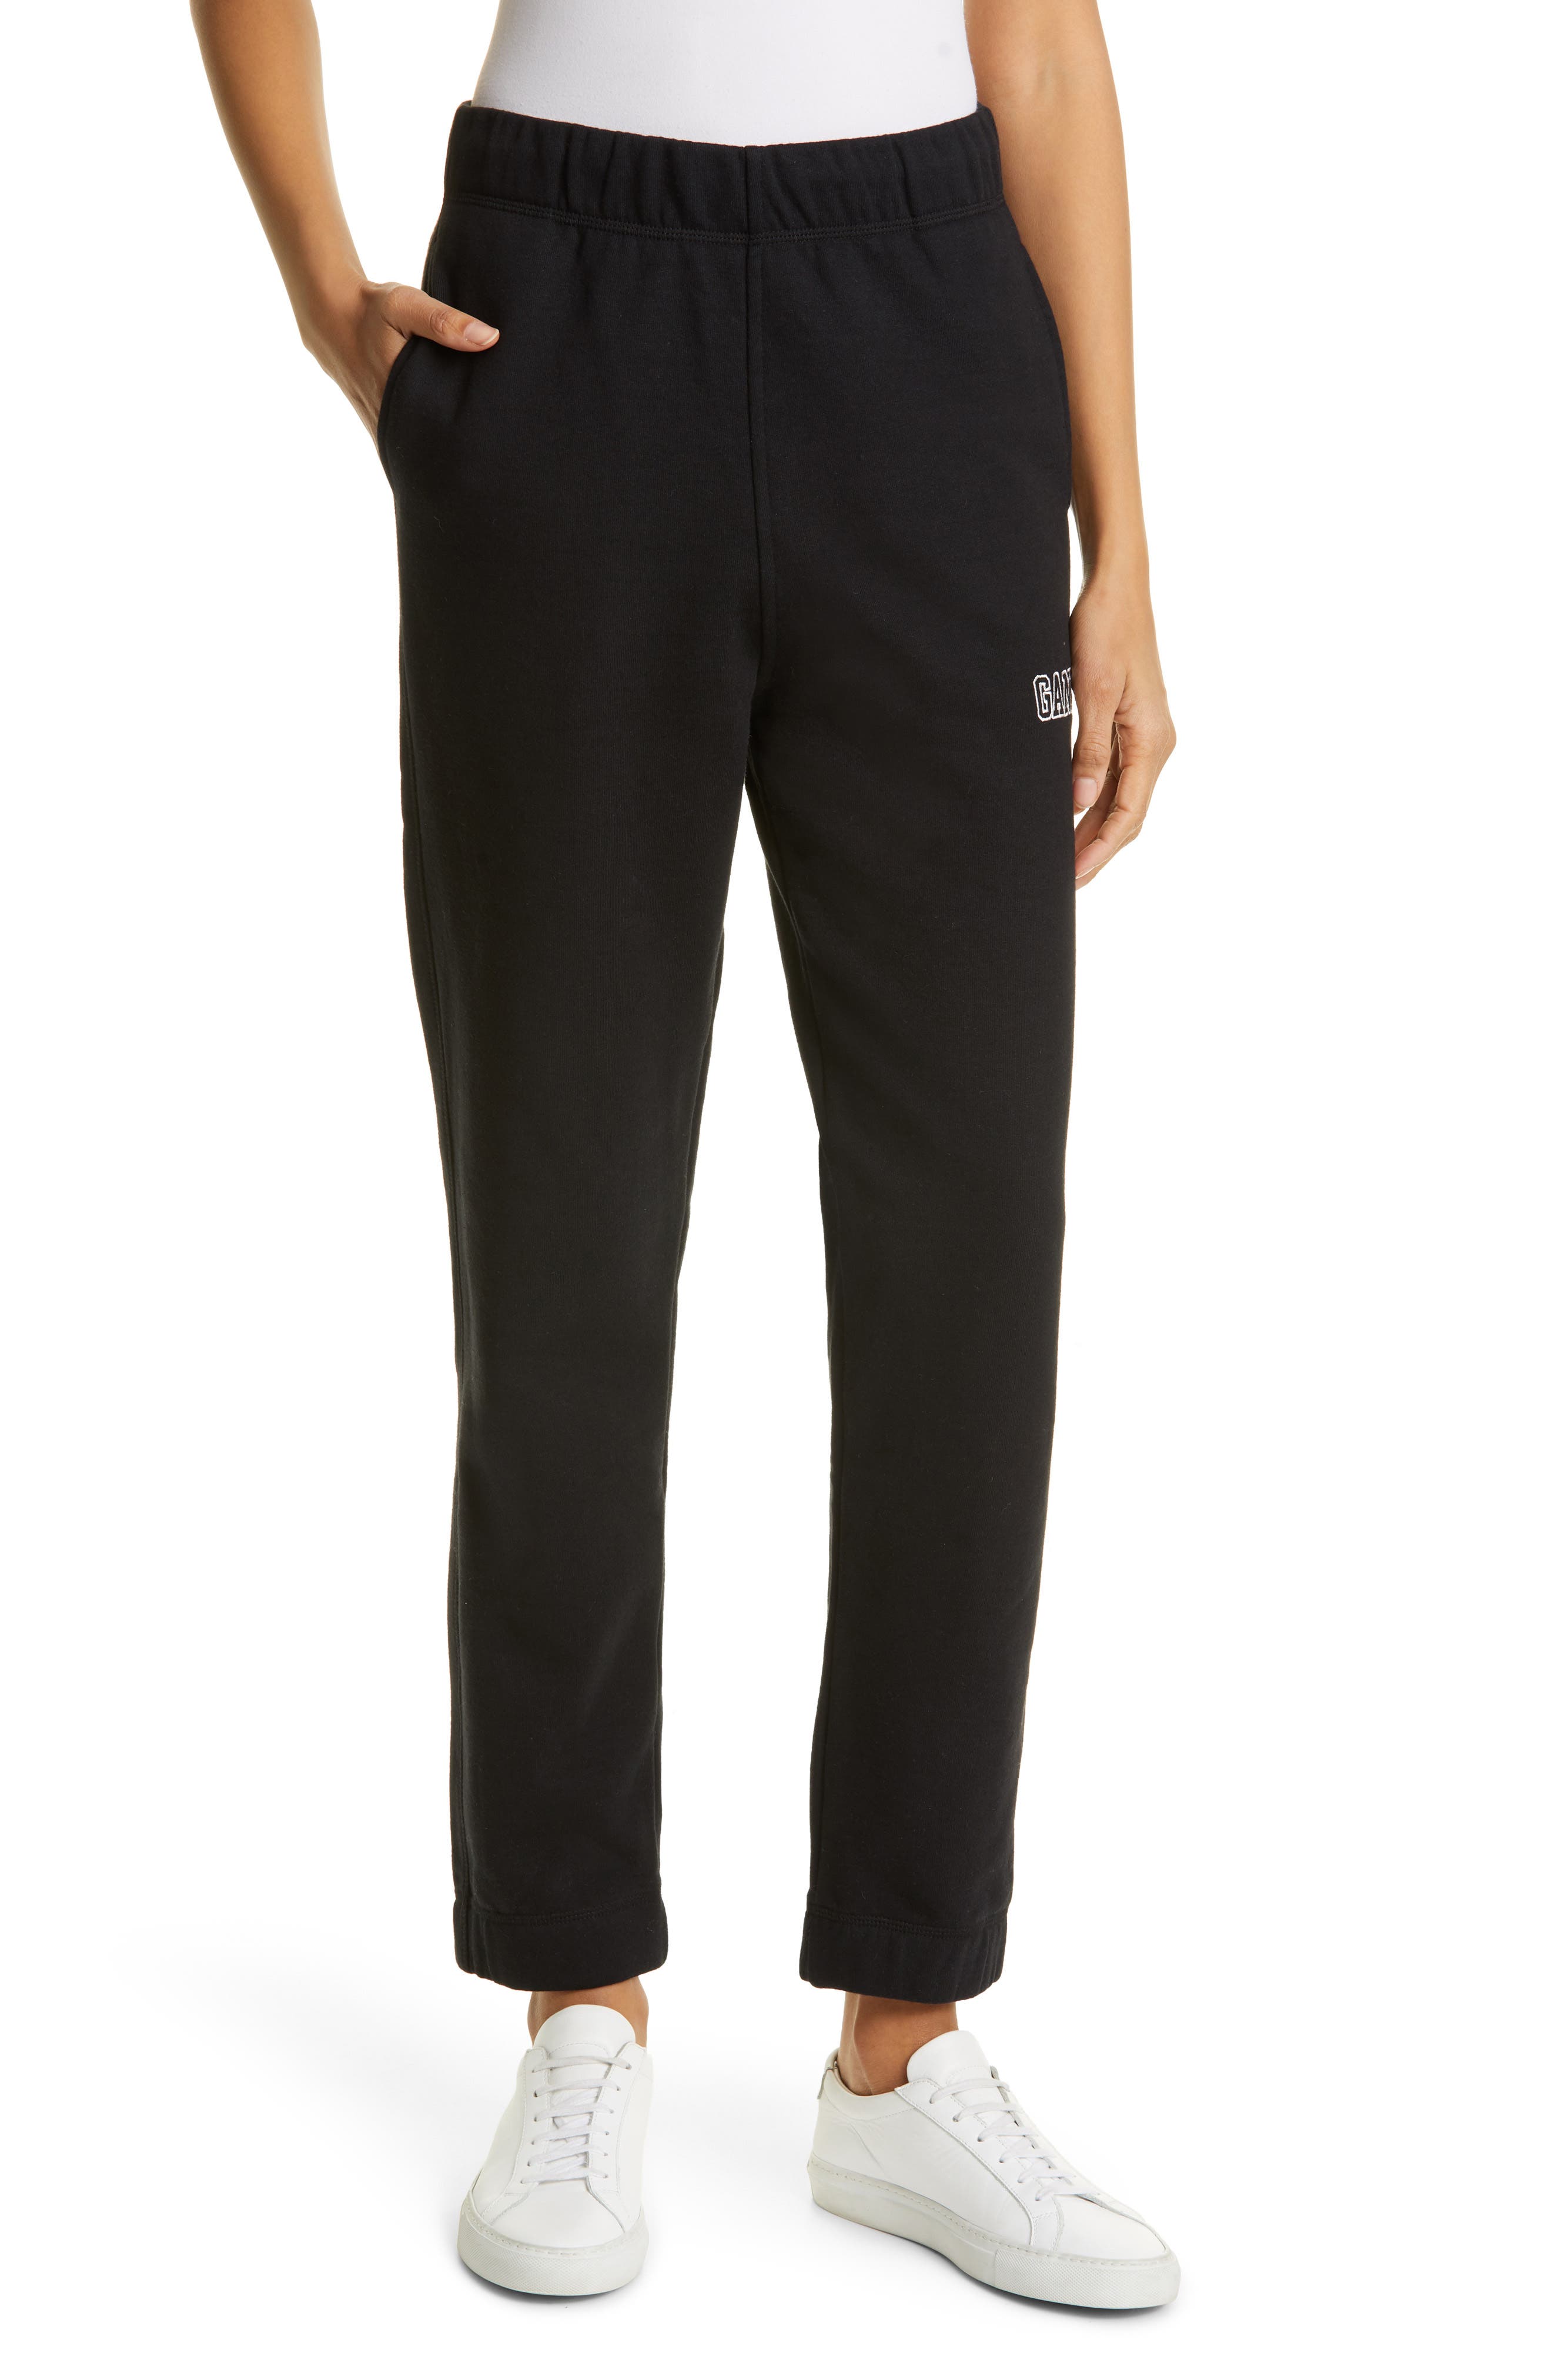 Ganni Software Isoli Organic Cotton Blend Sweatpants in Black at Nordstrom, Size X-Small